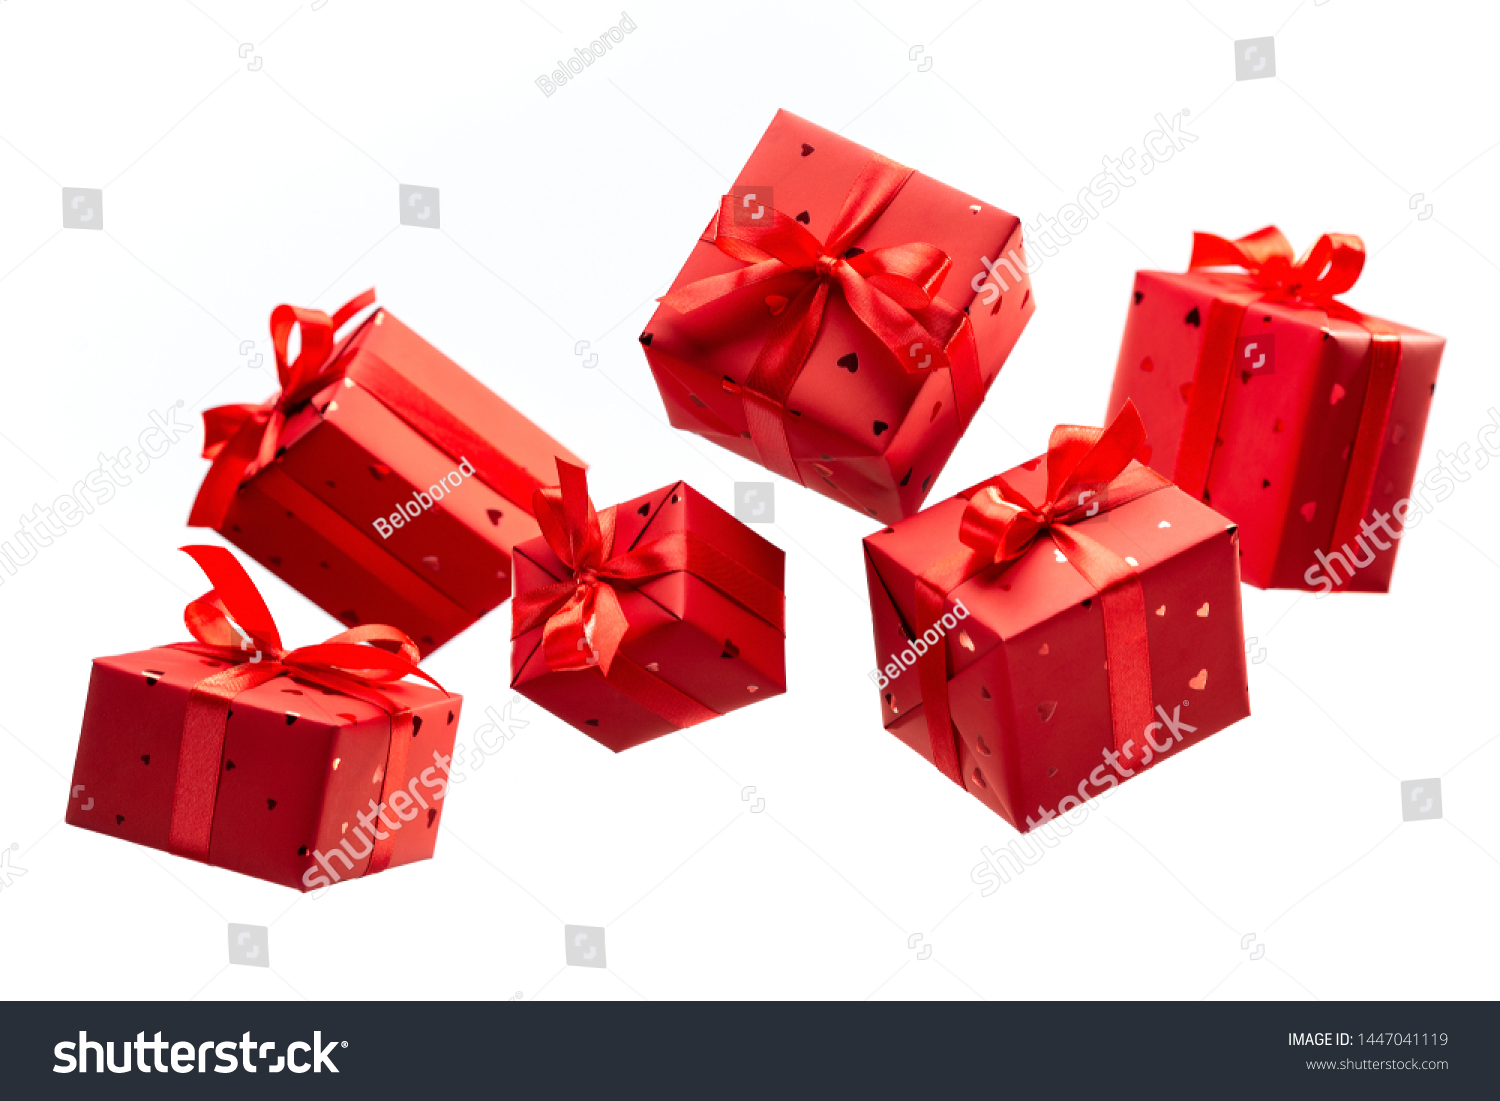 Surprise in flying boxes wrapped in red gift paper with bow on white background. Concept of holidays and greeting cards. Copy space.	 #1447041119